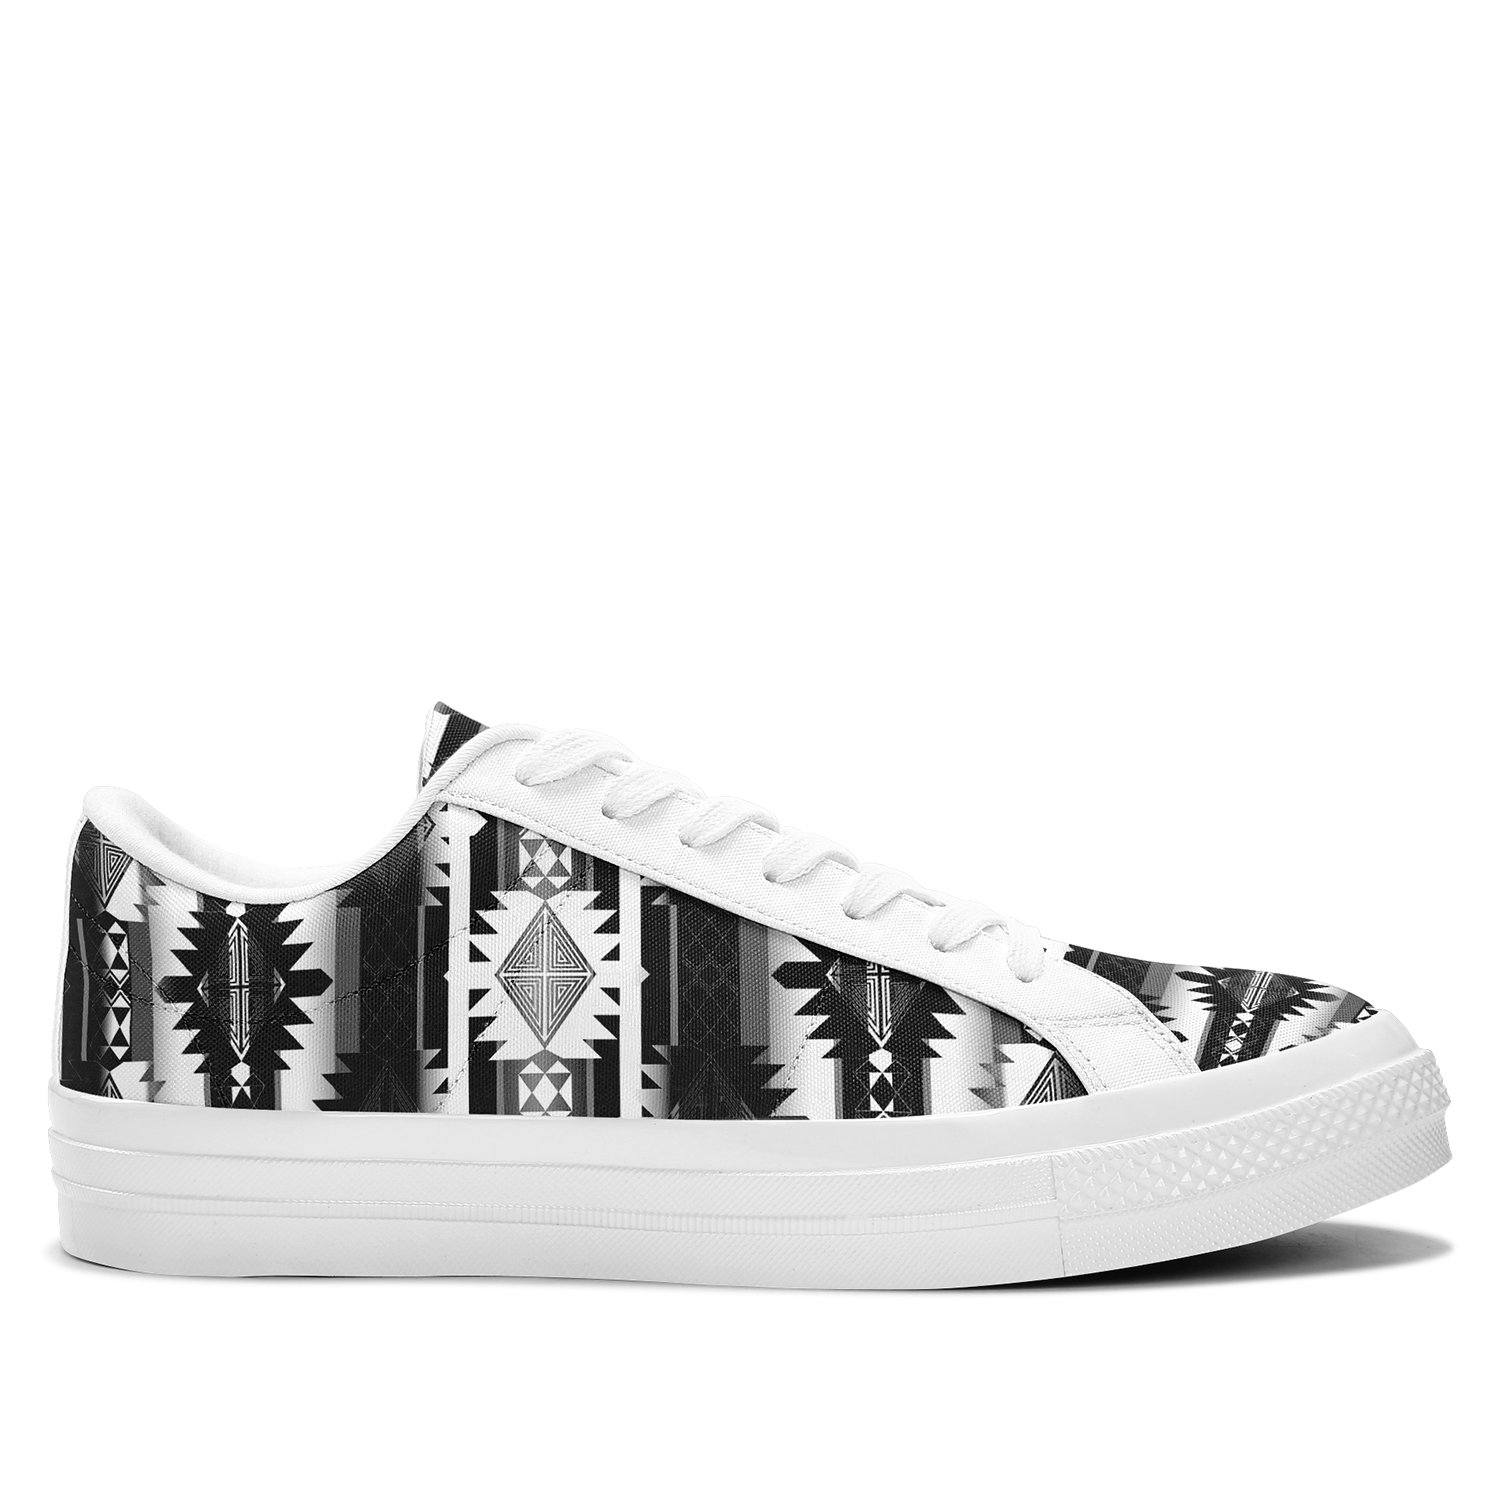 Okotoks Black and White Aapisi Low Top Canvas Shoes White Sole 49 Dzine 